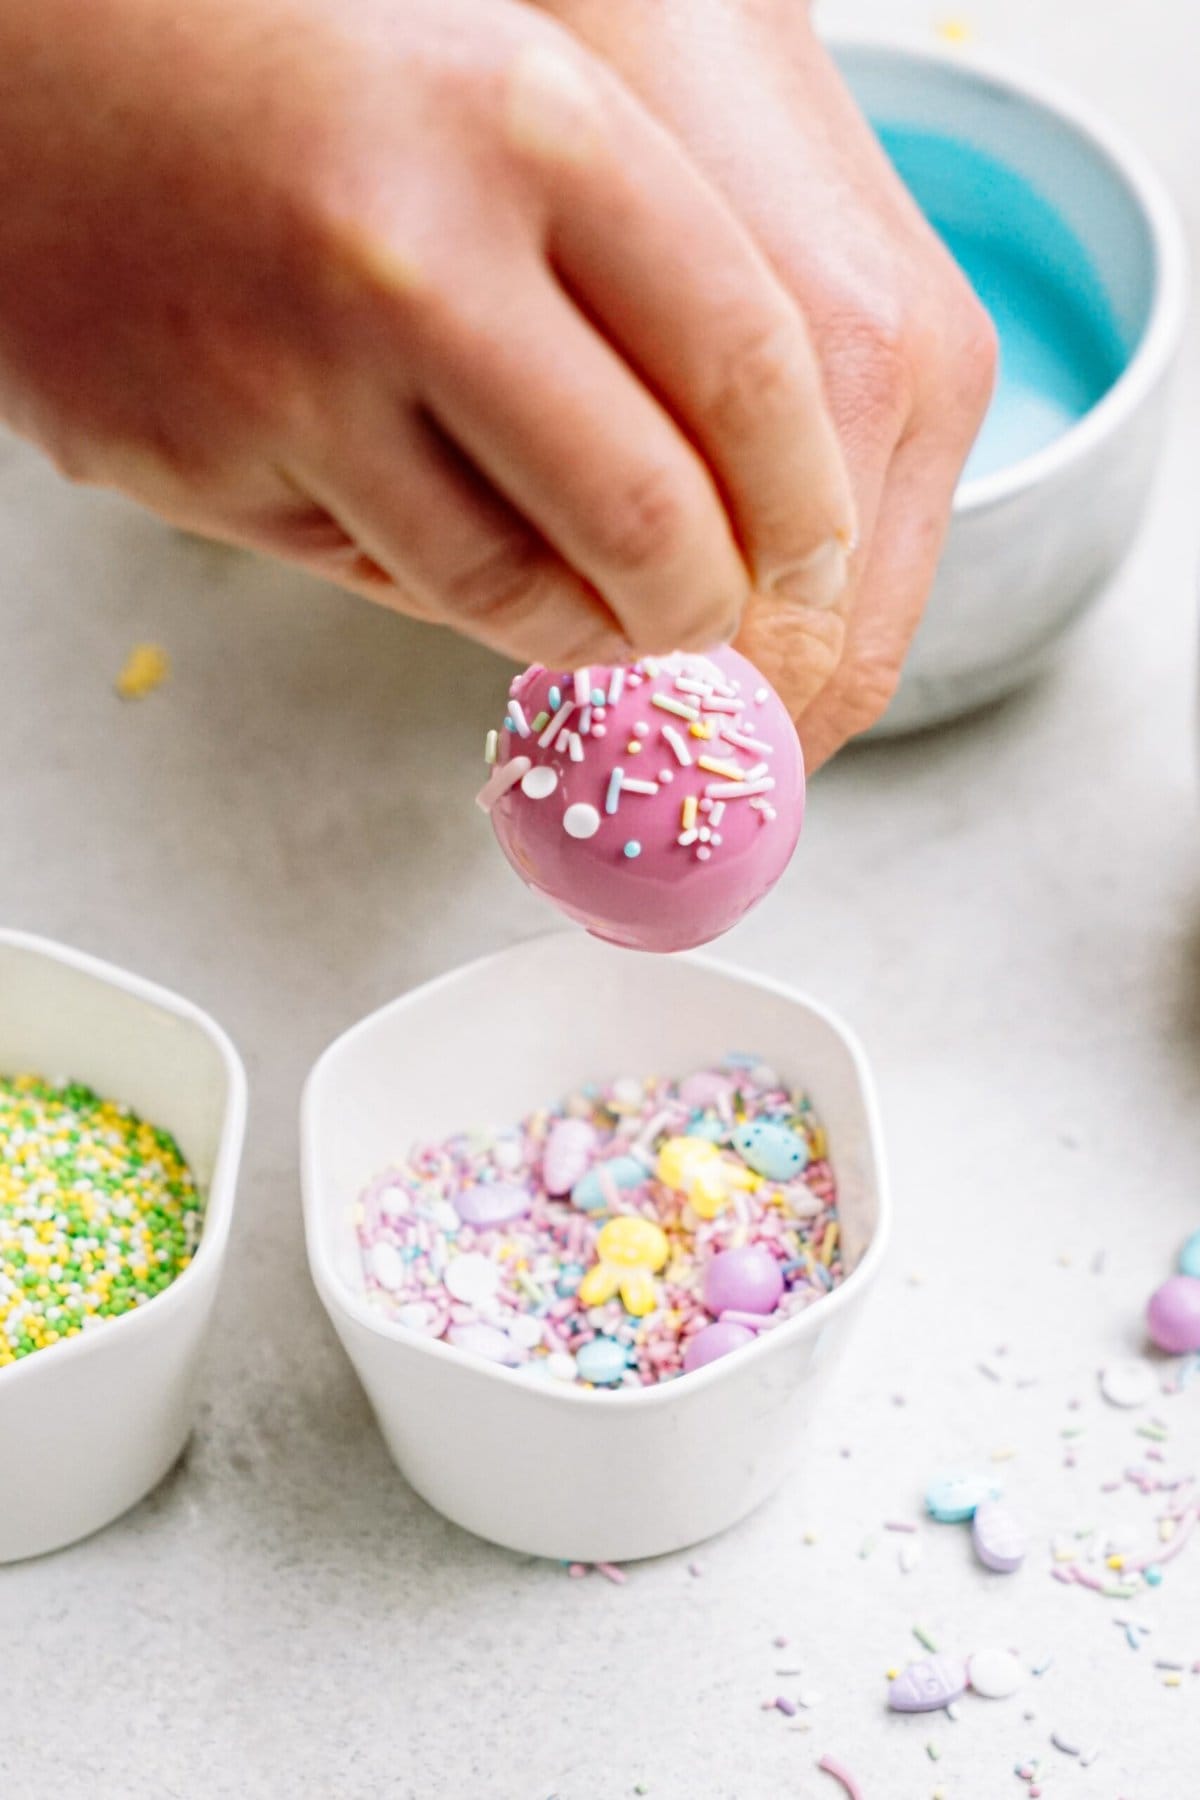 Decorating a pink cake pop with sprinkles over a bowl.